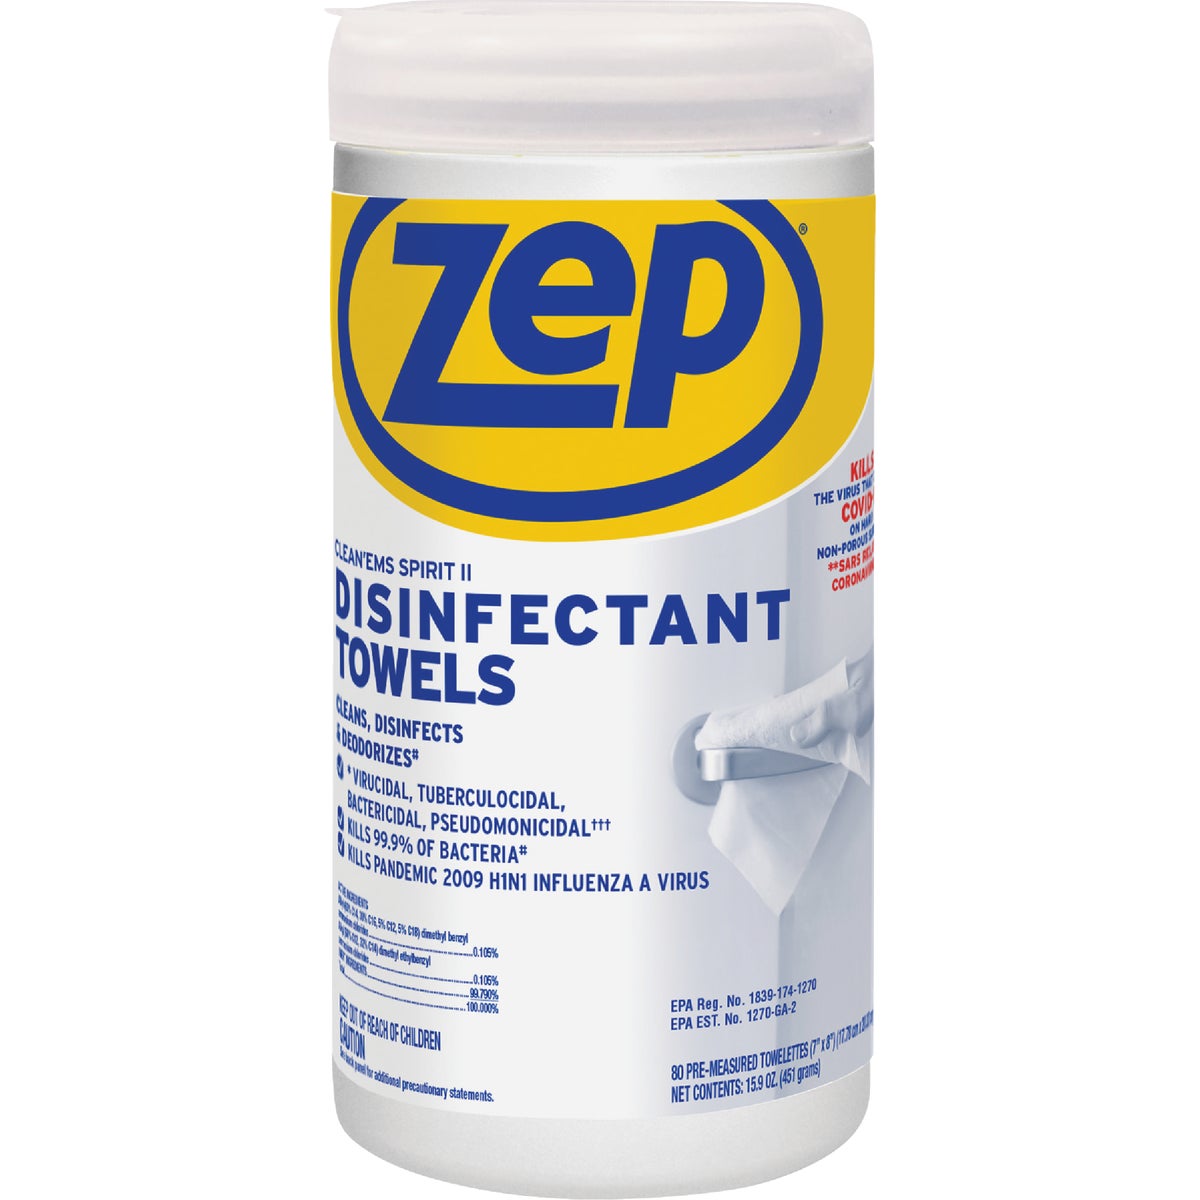 Zep Clean'ems Spirit II Disinfectant Towelettes (80-Count)